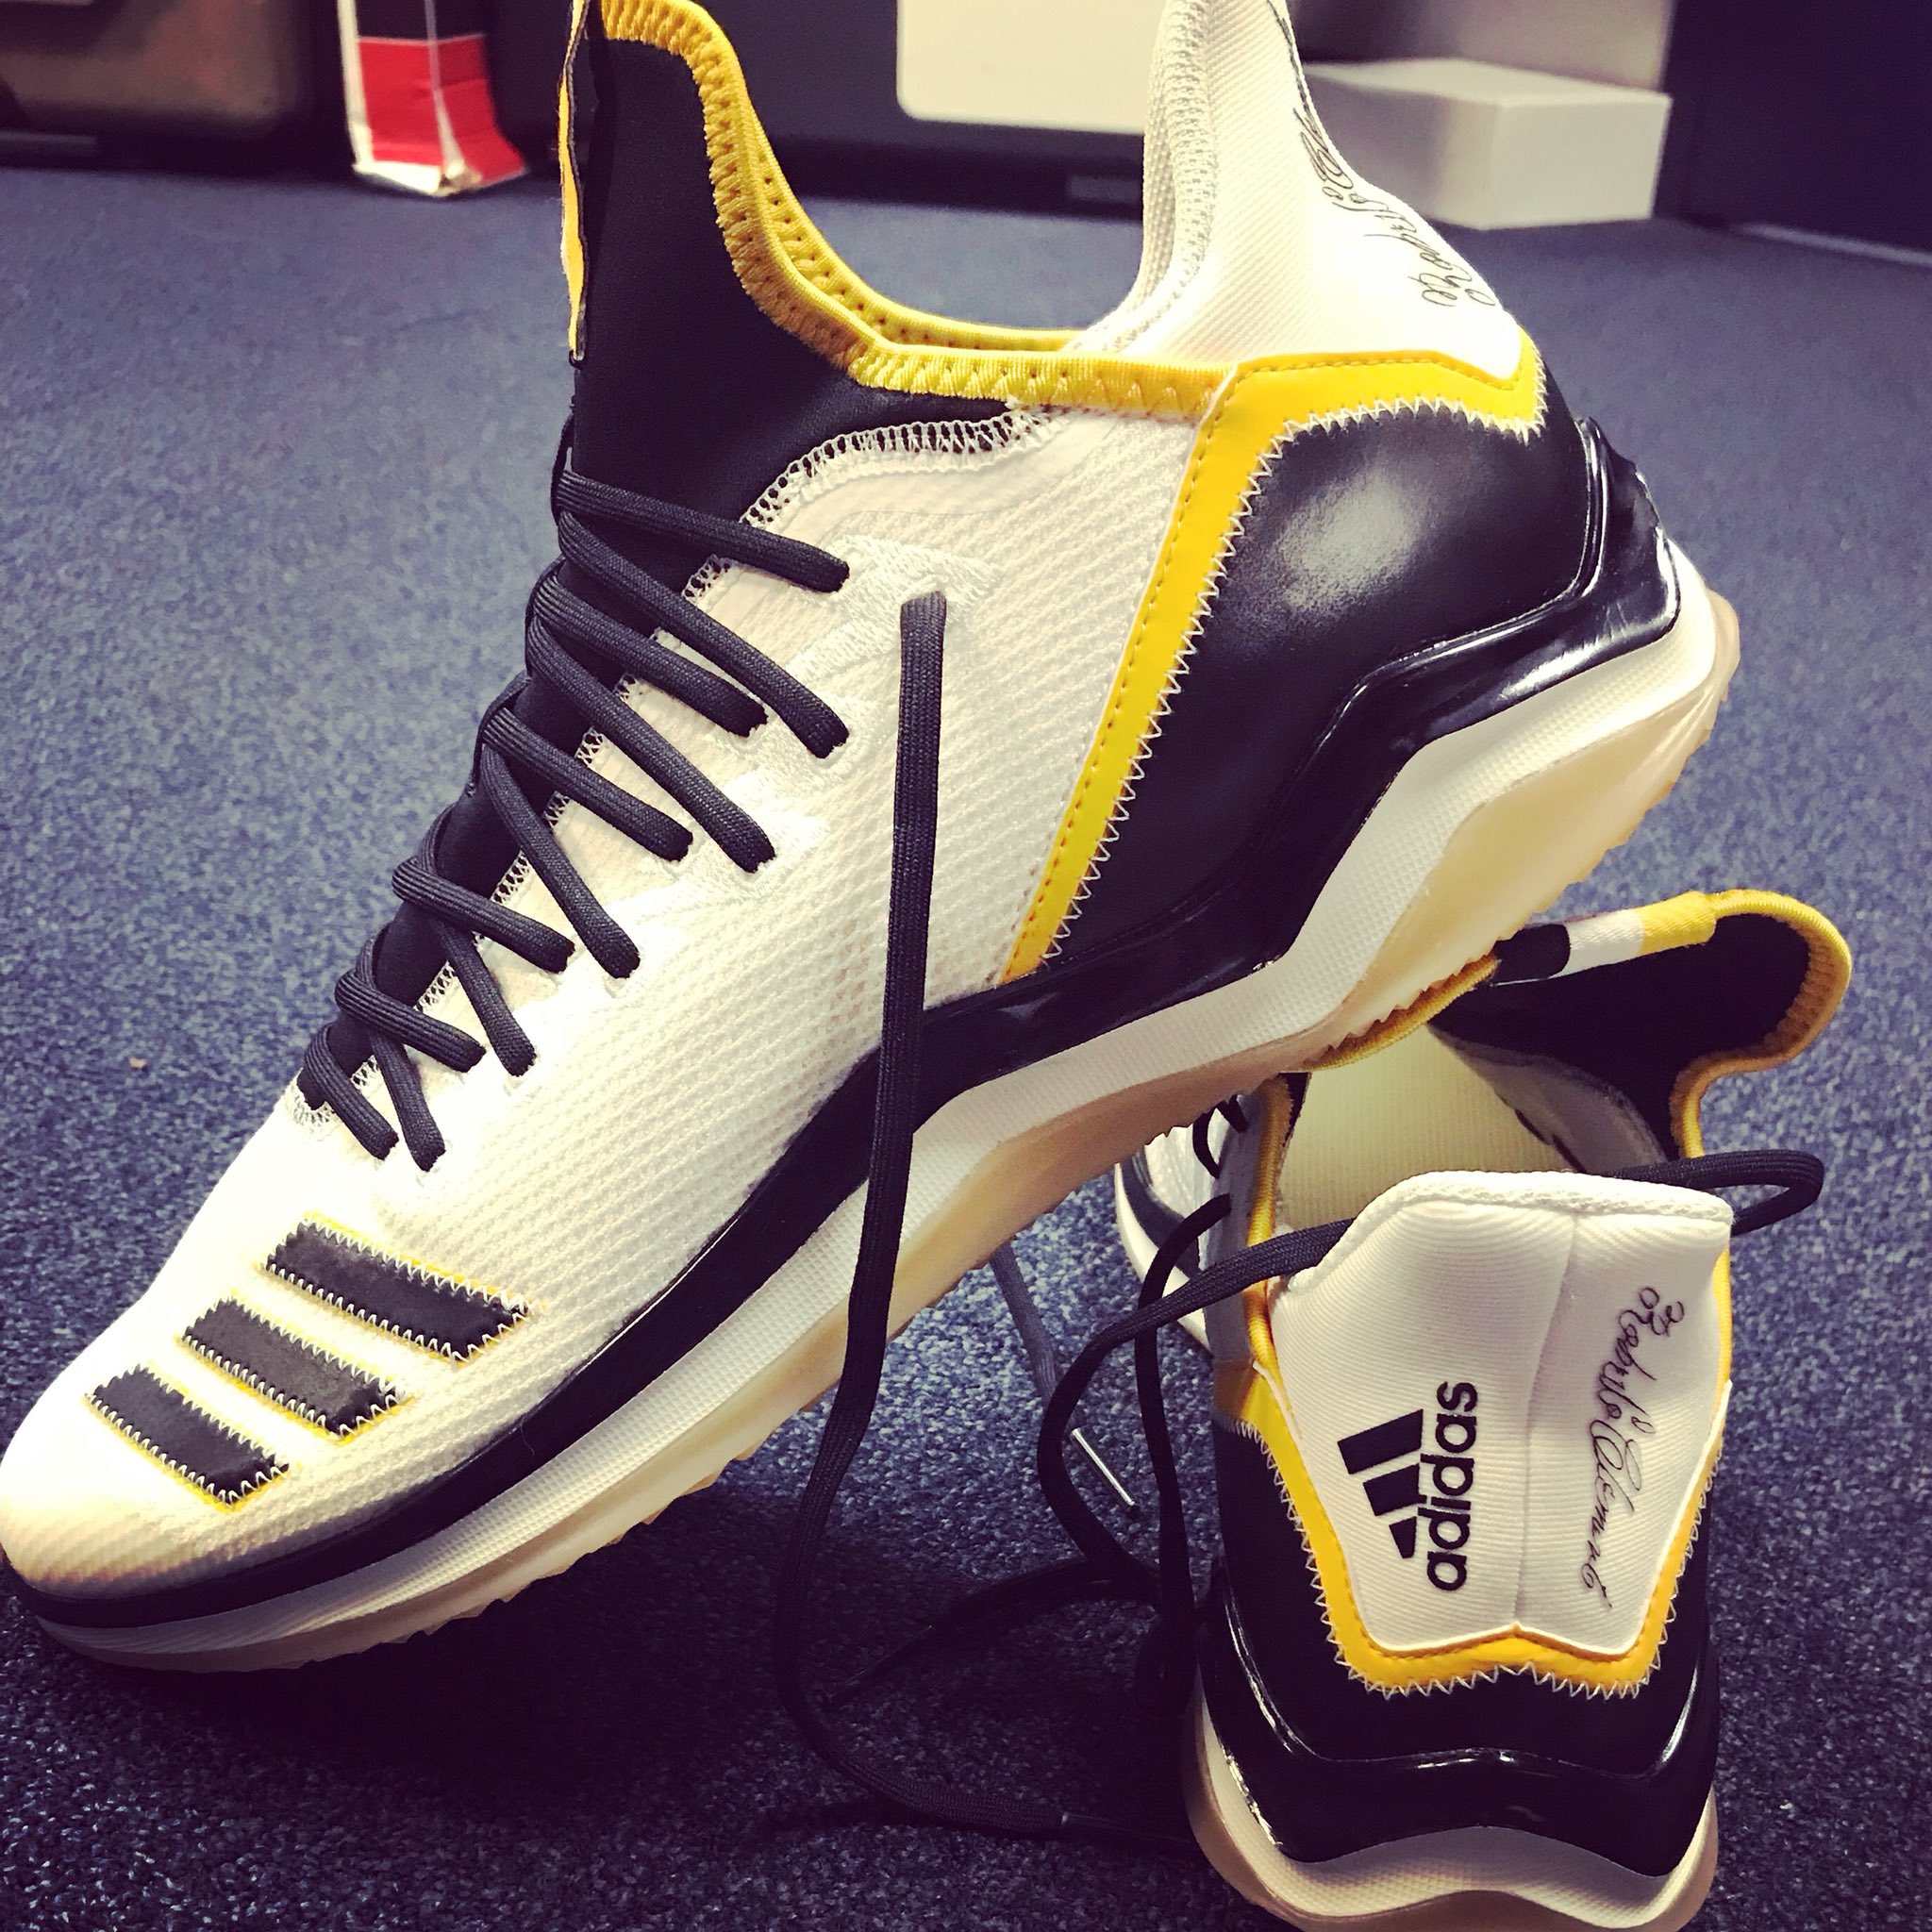 Cabecear Radar Impuro Santitos Alomar jr on Twitter: "ADIDAS wow once again you've shown your  awareness for history. A person who symbolized humanity for all of us and  leadership in our world . Roberto Clemente